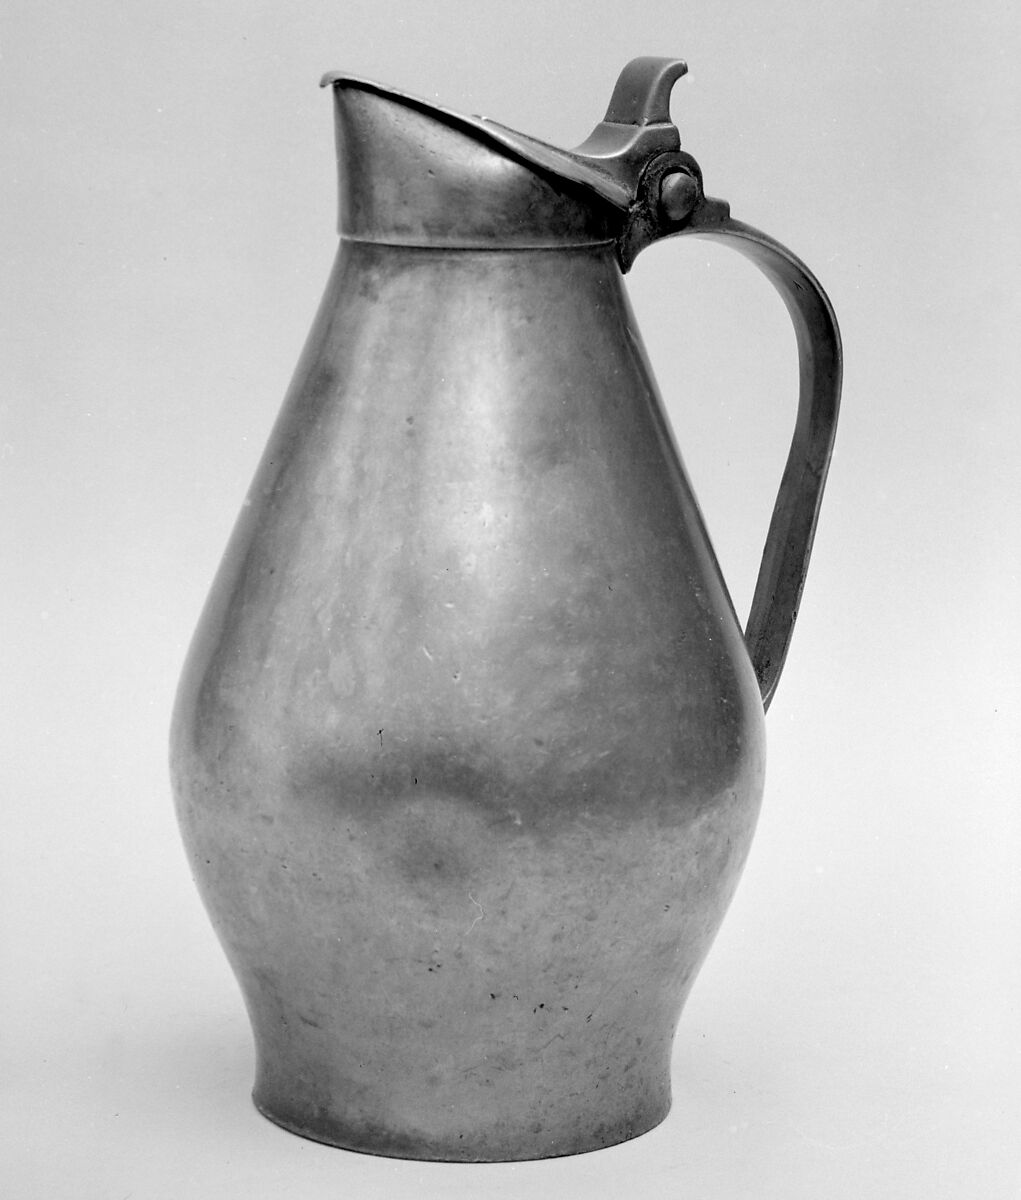 Pitcher, Pewter, possibly French 